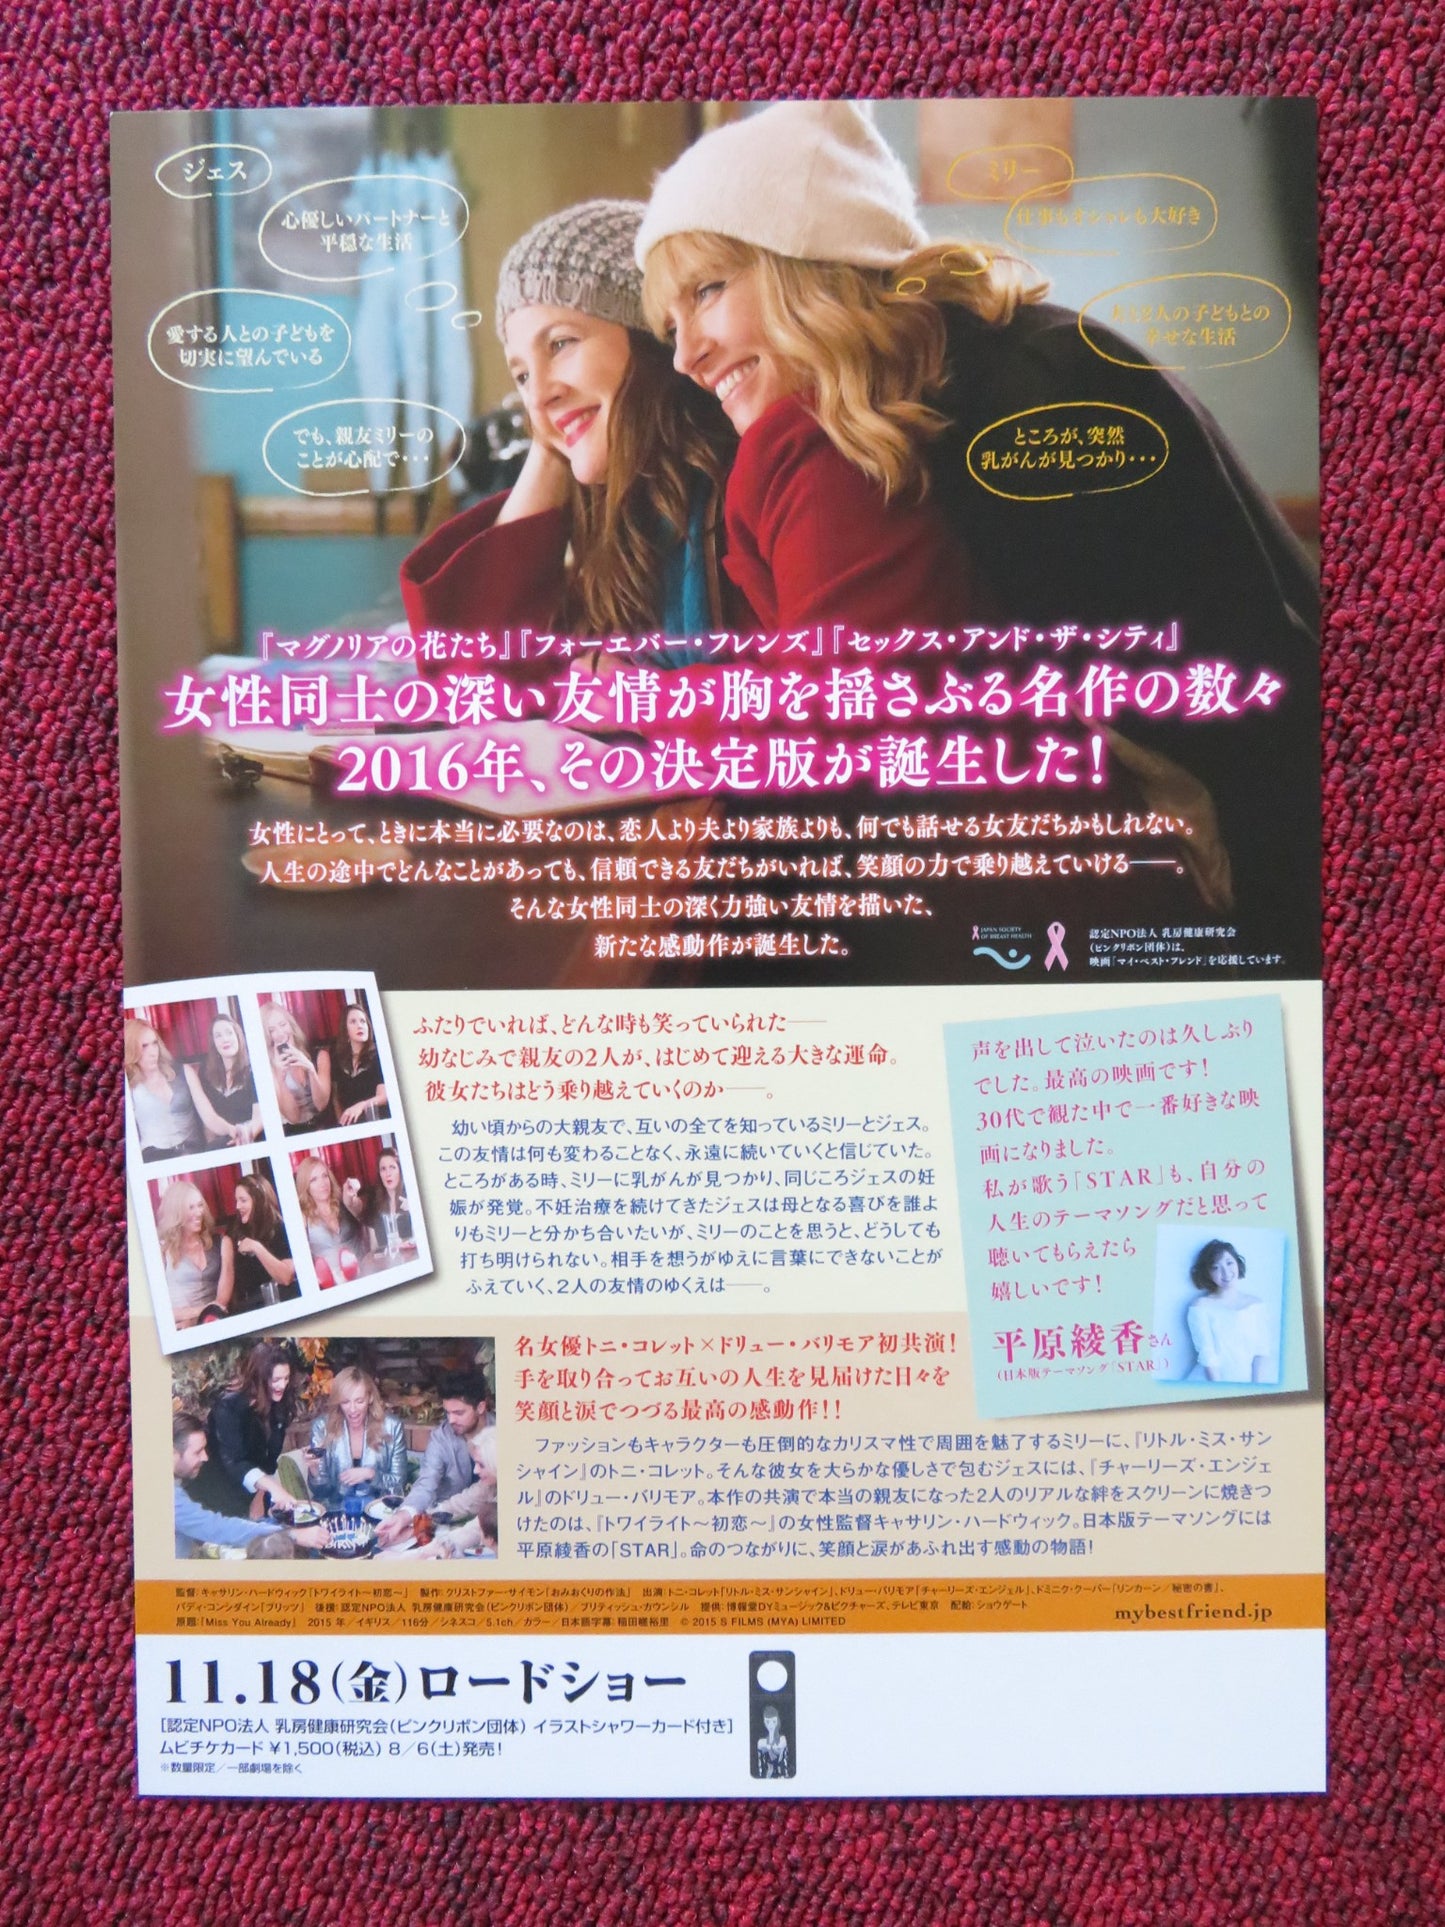 MISS YOU ALREADY JAPANESE CHIRASHI (B5) POSTER DREW BARRYMORE TONI COLLETTE 2015